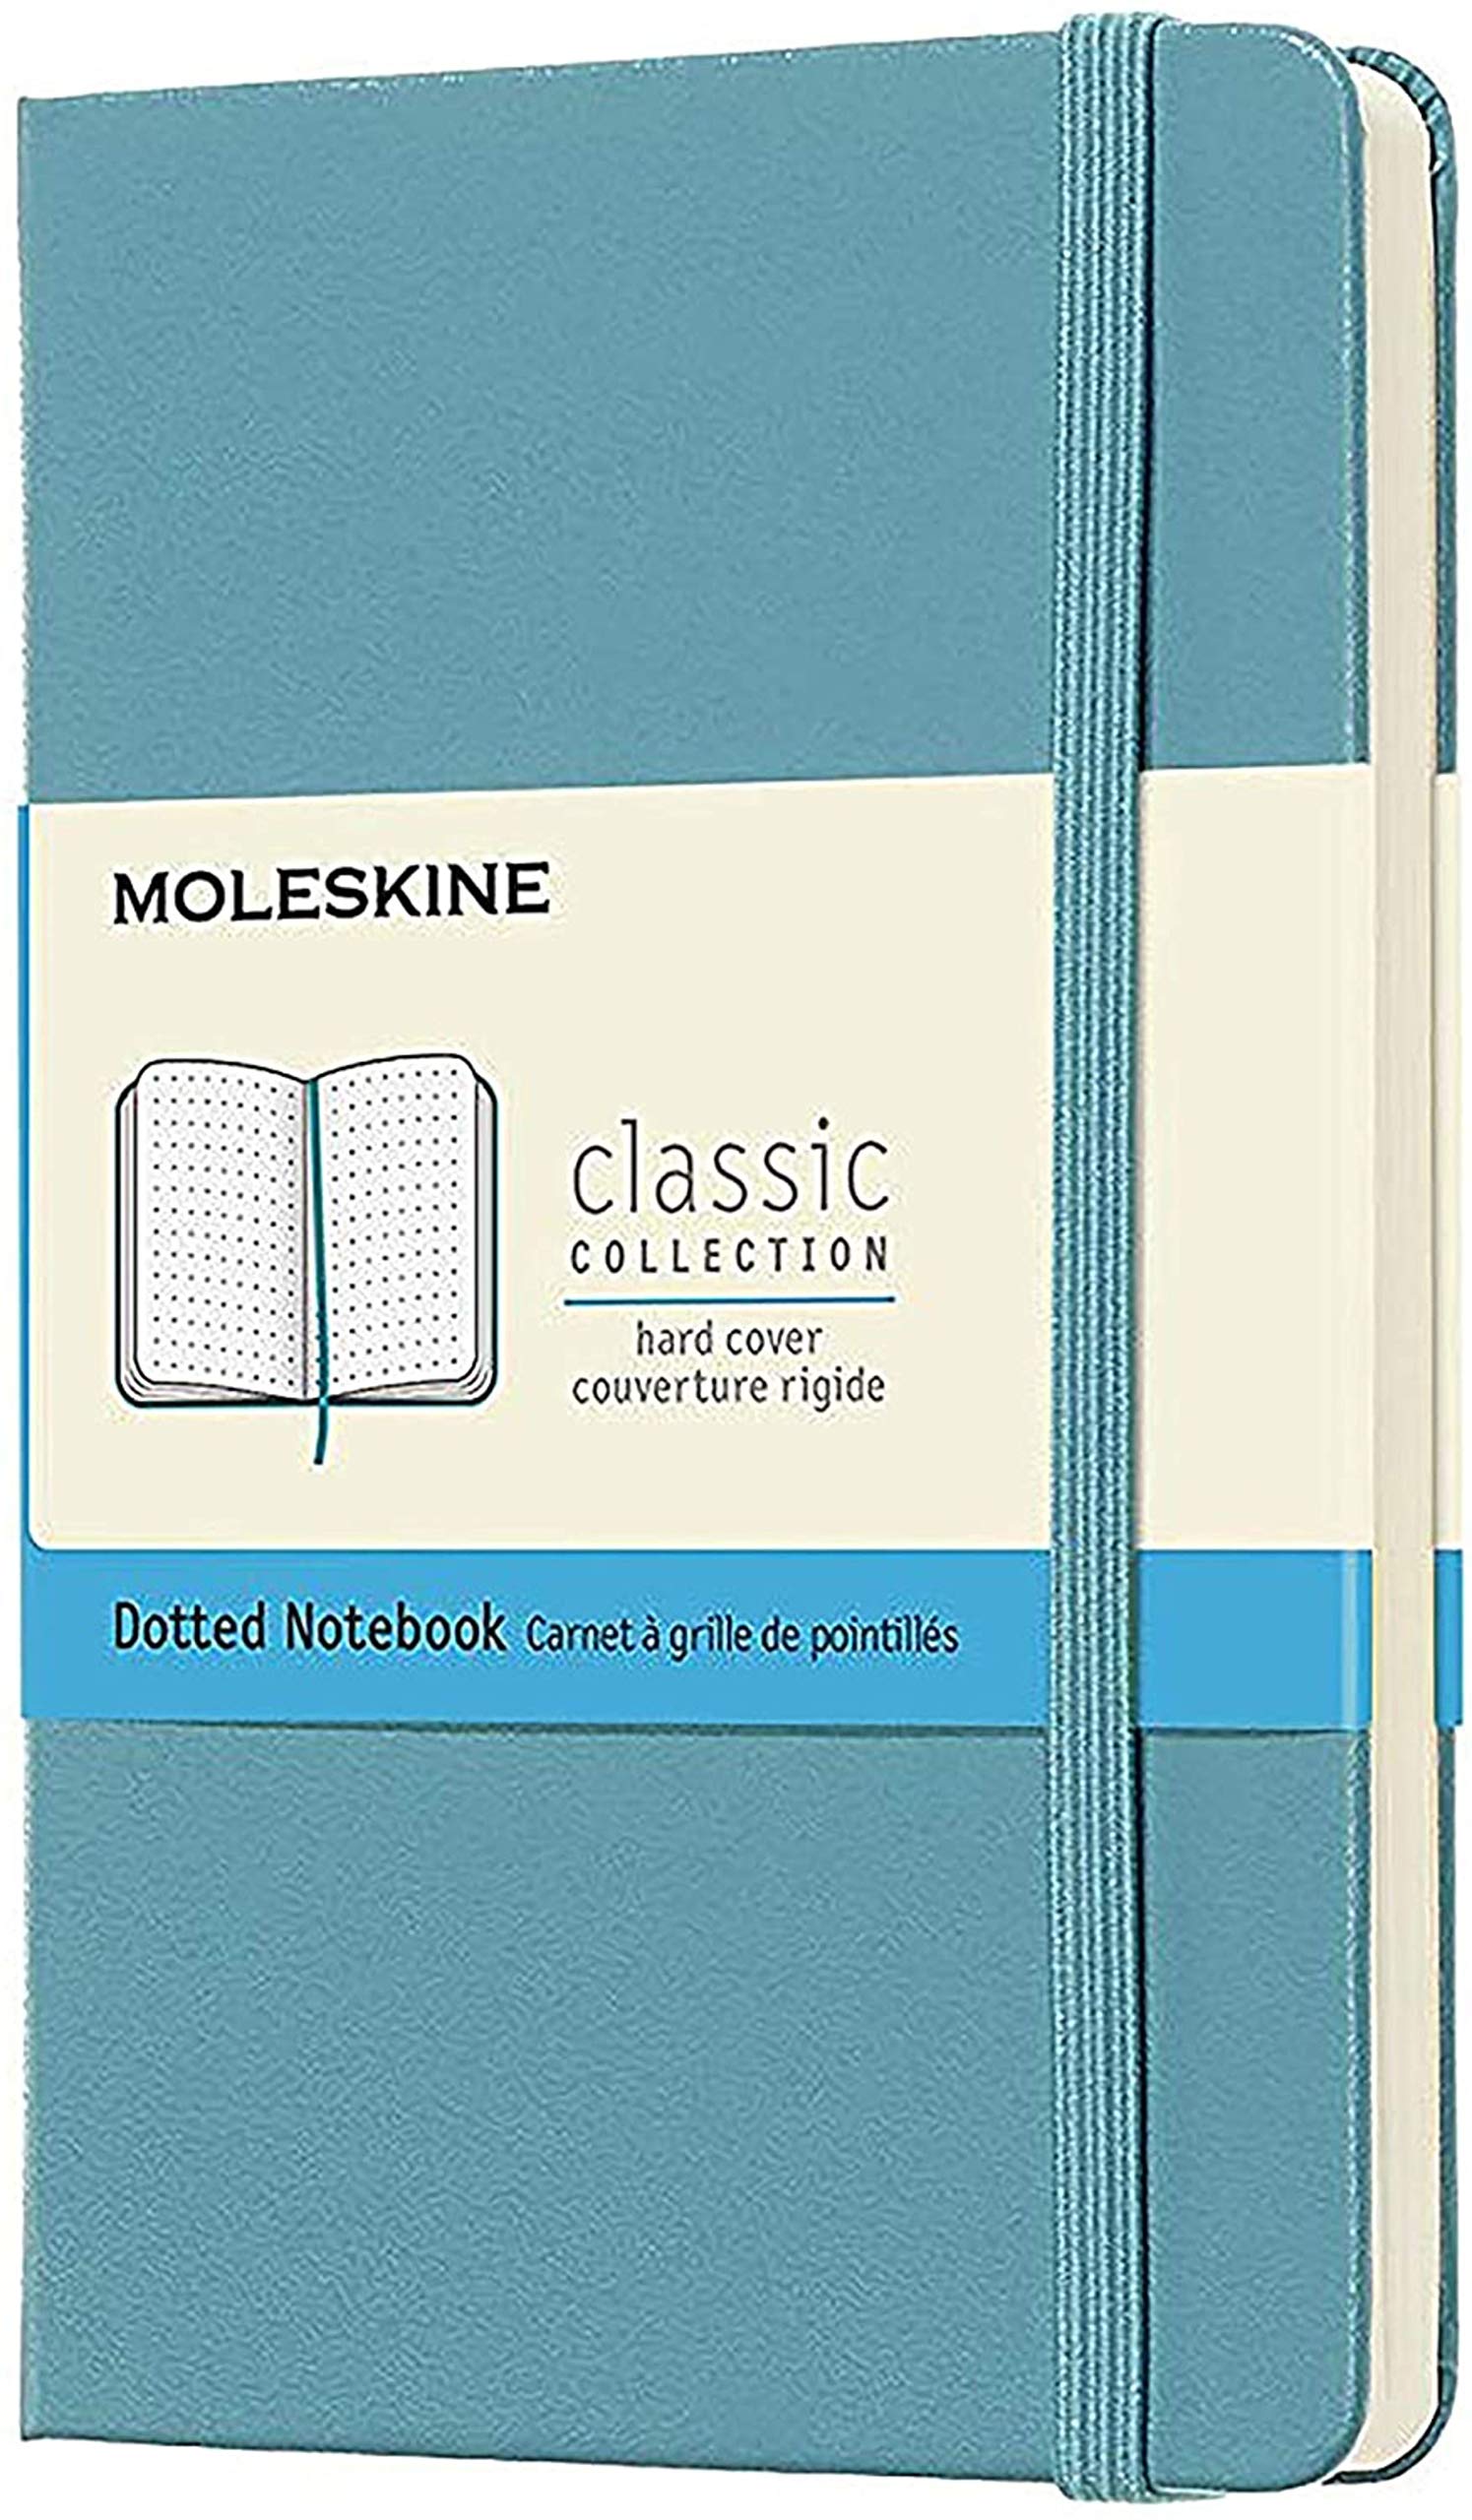 Moleskine + Classic Notebook, Hard Cover, Pocket (3.5″ x 5.5″)  Dotted, Reef Blue, 192 Pages